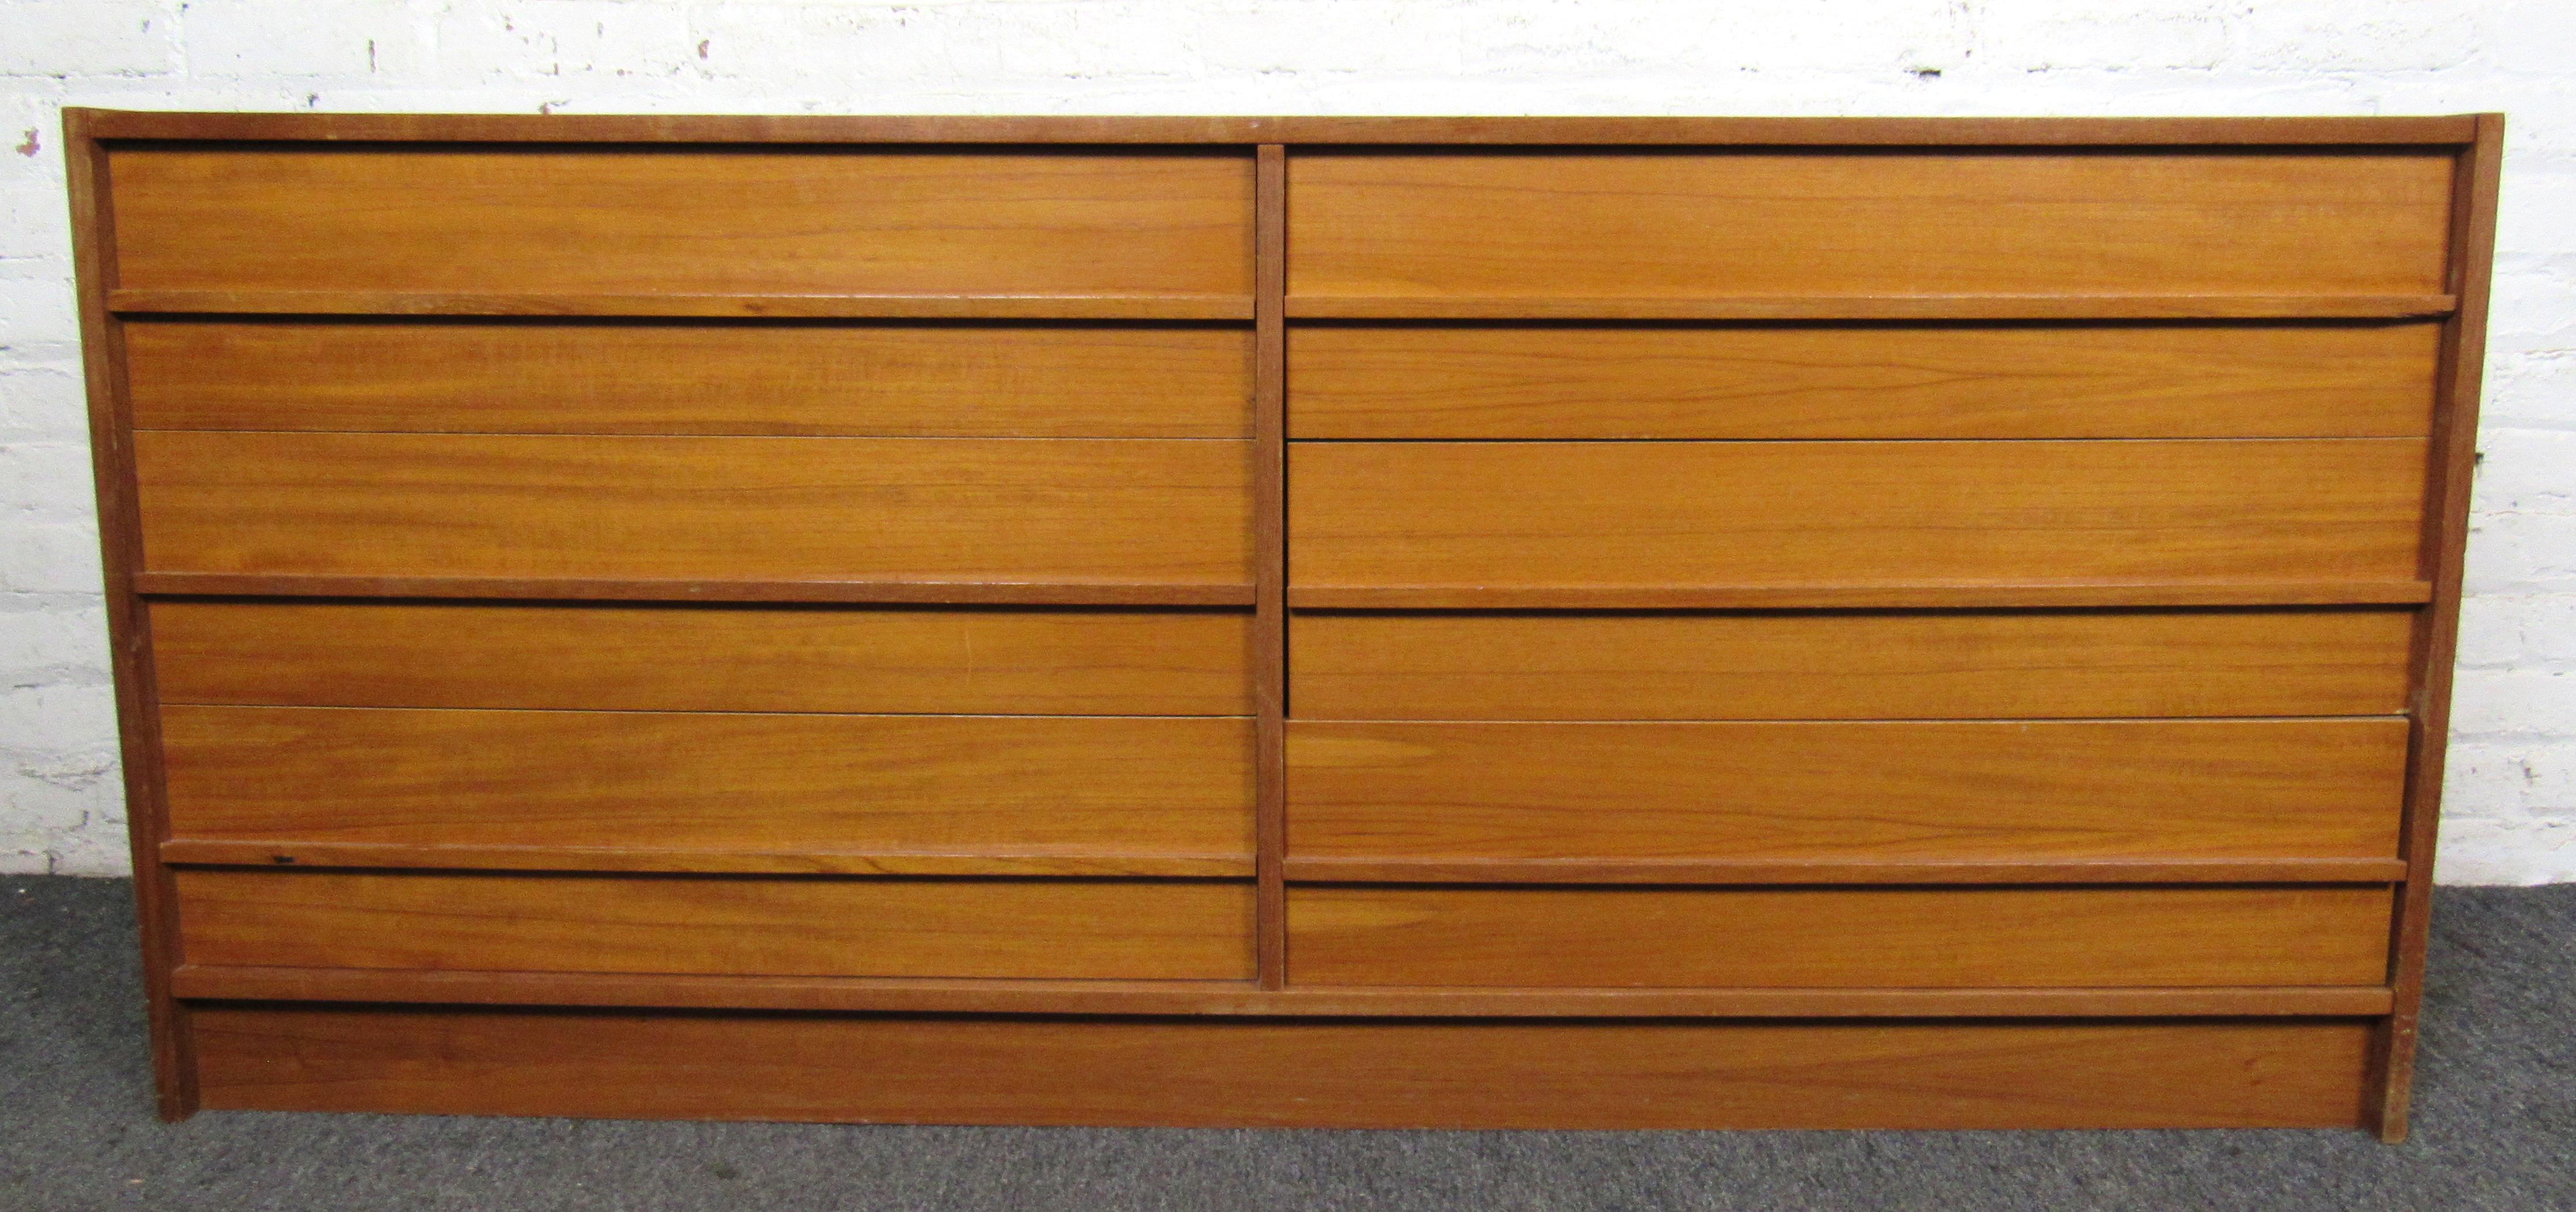 Mid-Century Modern style long dresser with six wide drawers. Warm teak veneer throughout.
(Please confirm location NY or NJ).